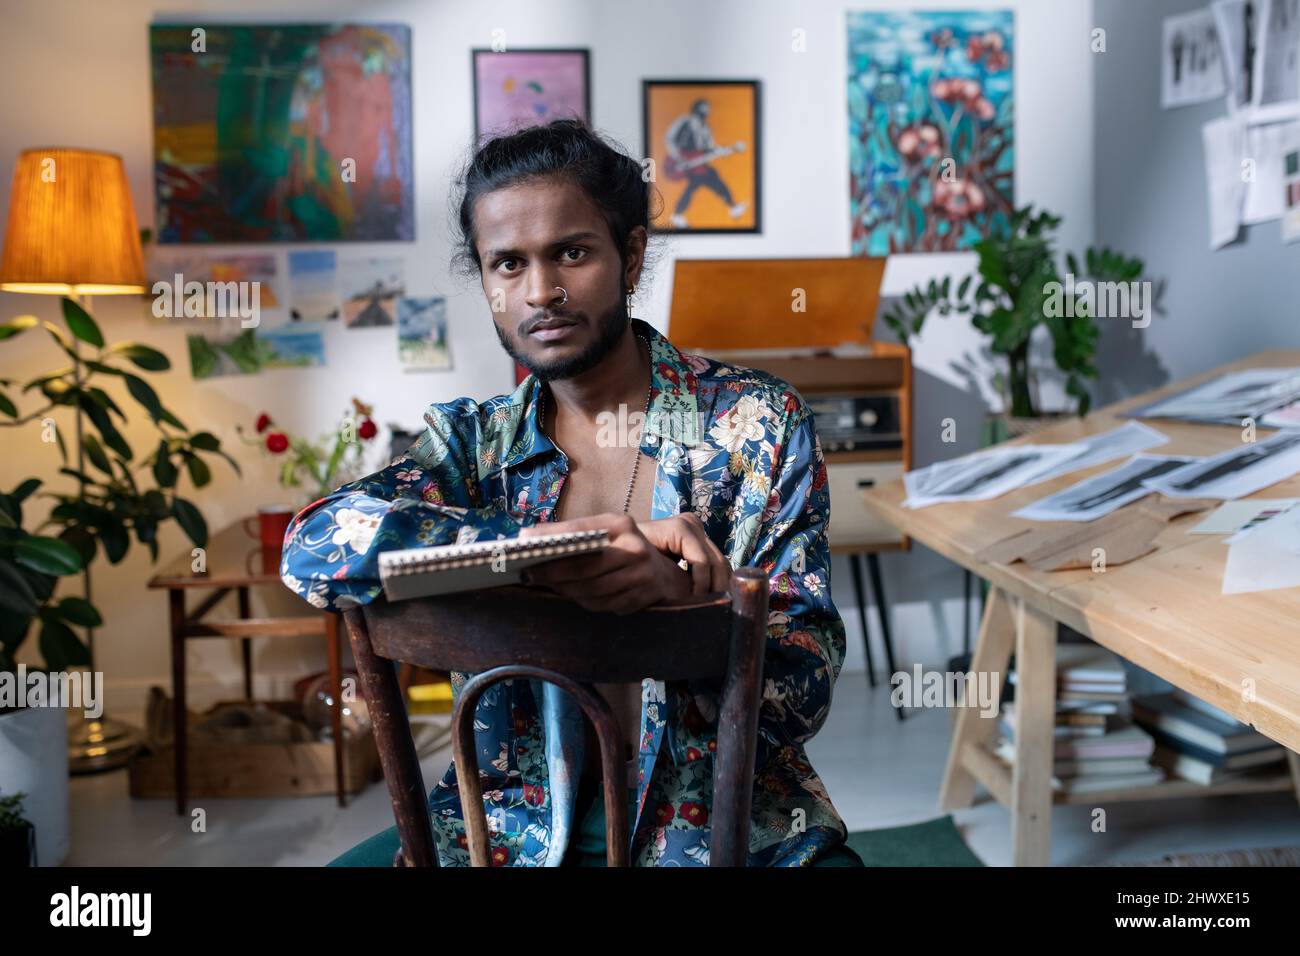 Self-confident young man of Indian ethnicity in smart casualwear working in art studio while sitting against walls with paintings Stock Photo